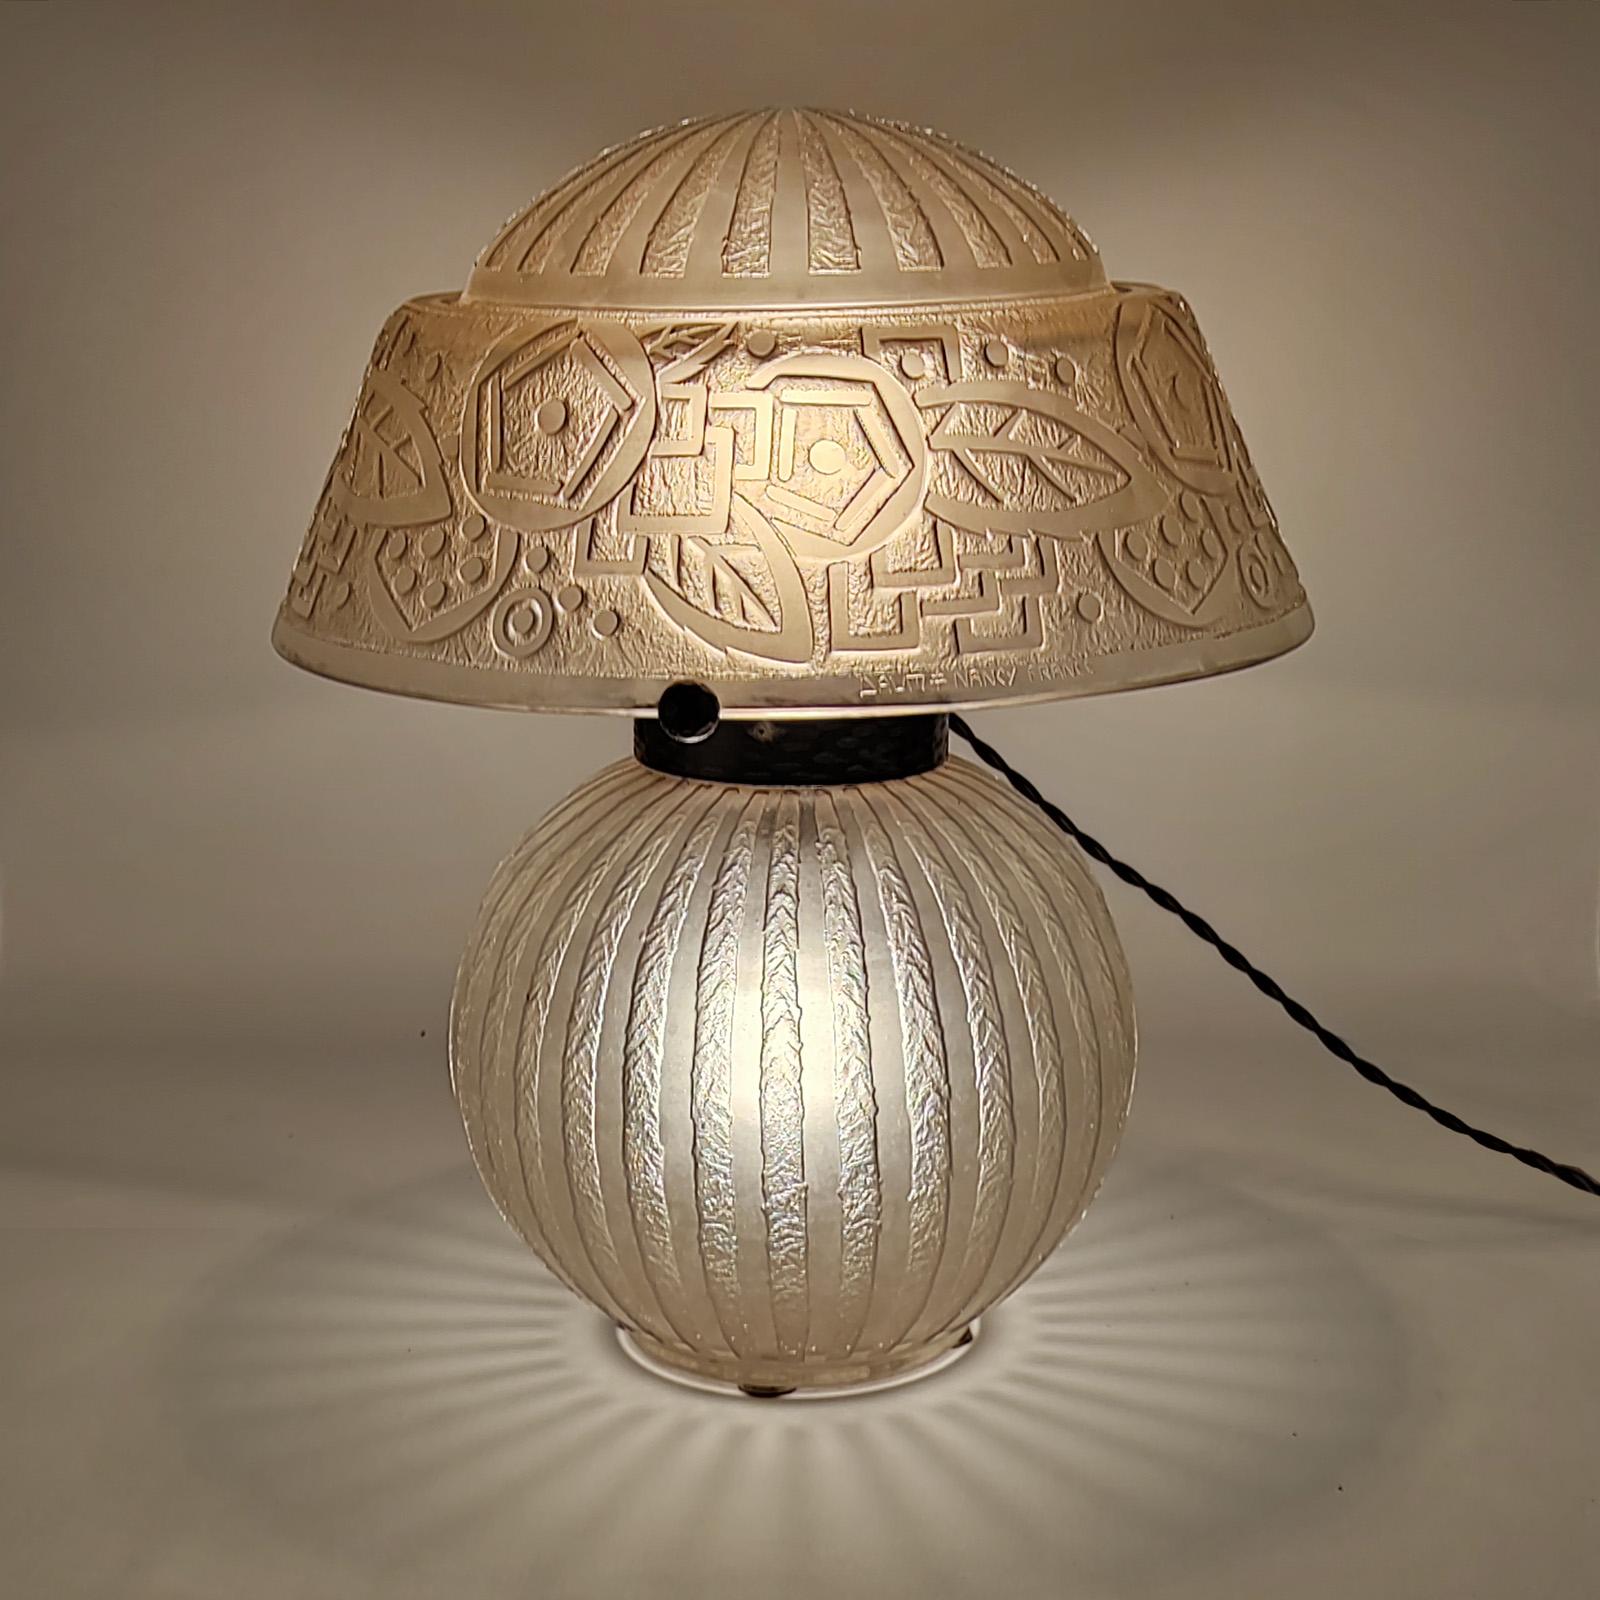 Art Deco Daum Freres Nancy table lamp.
Colorless smoky pinkish glass, etched ice-mat, with a geometric pattern.
Three arms in chromed hammered wrought iron holding the shade.
Electrified, two bayonet sockets, foot illuminated.
Foot and lamp-shade